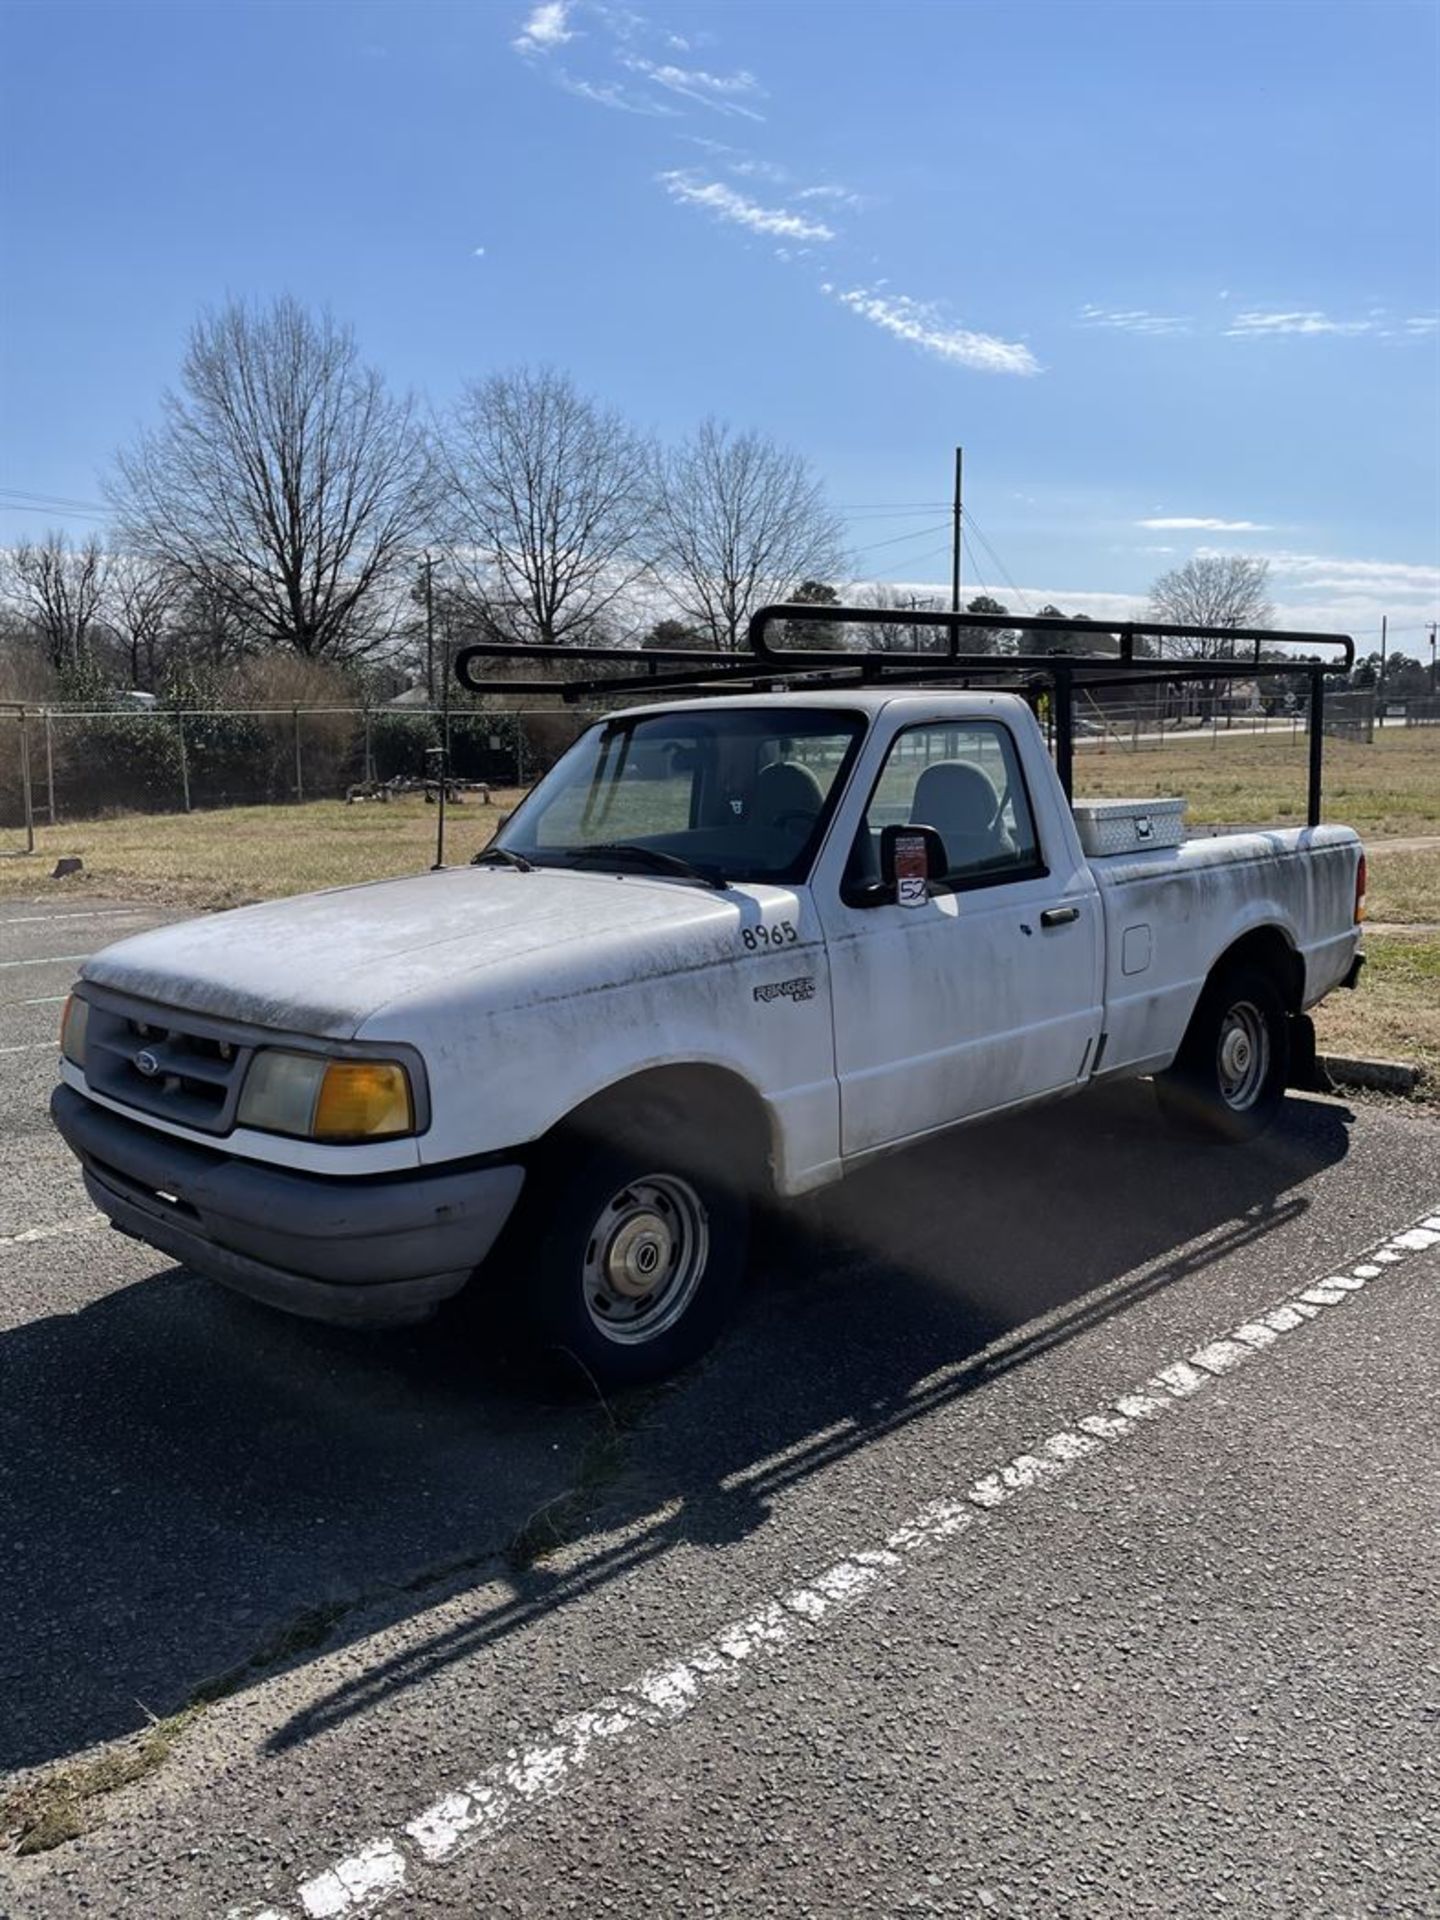 Ford Ranger Pickup Truck, No Title (Condition Unknown)